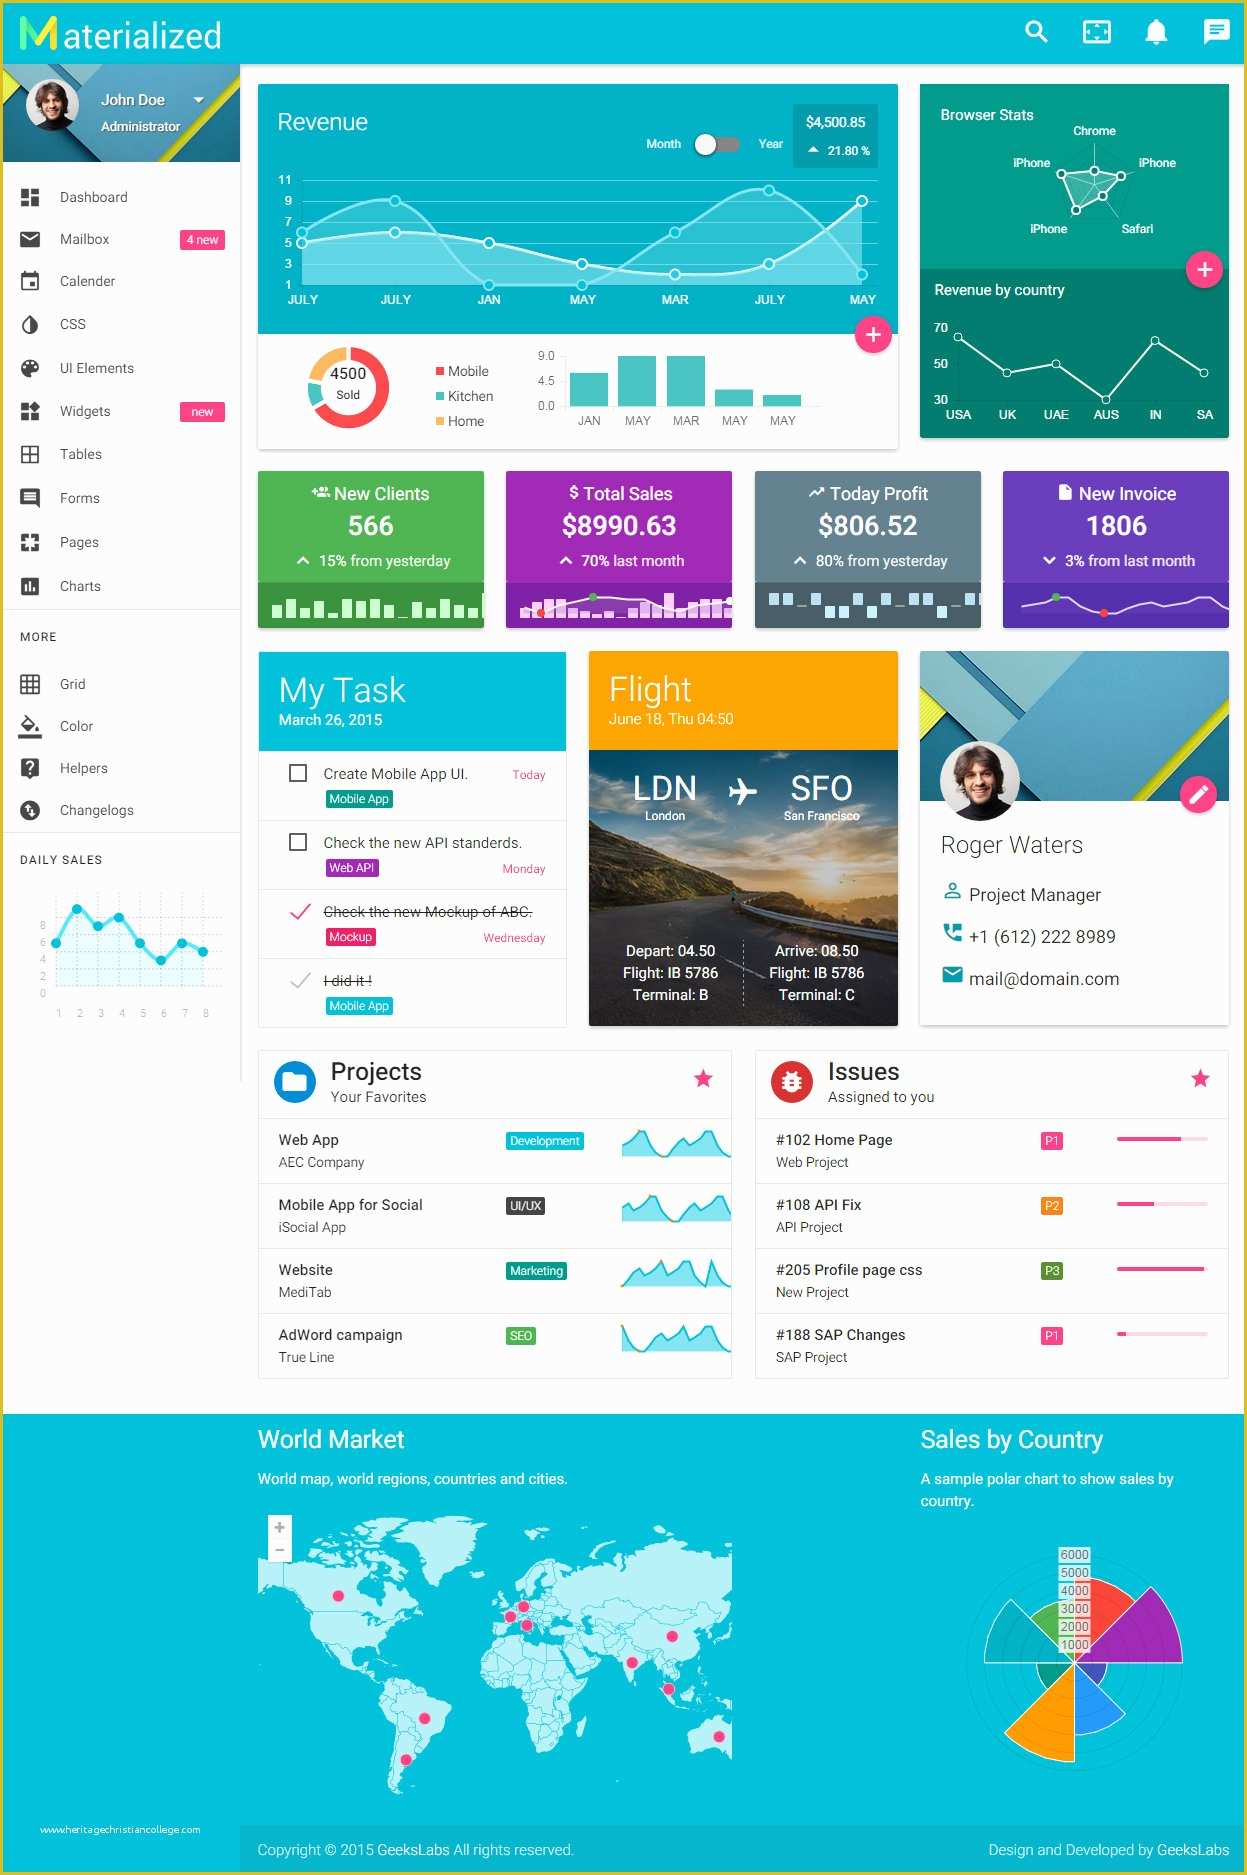 Crm Website Templates Free Download Of 20 Best Responsive Material Design Templates HTML5 2018